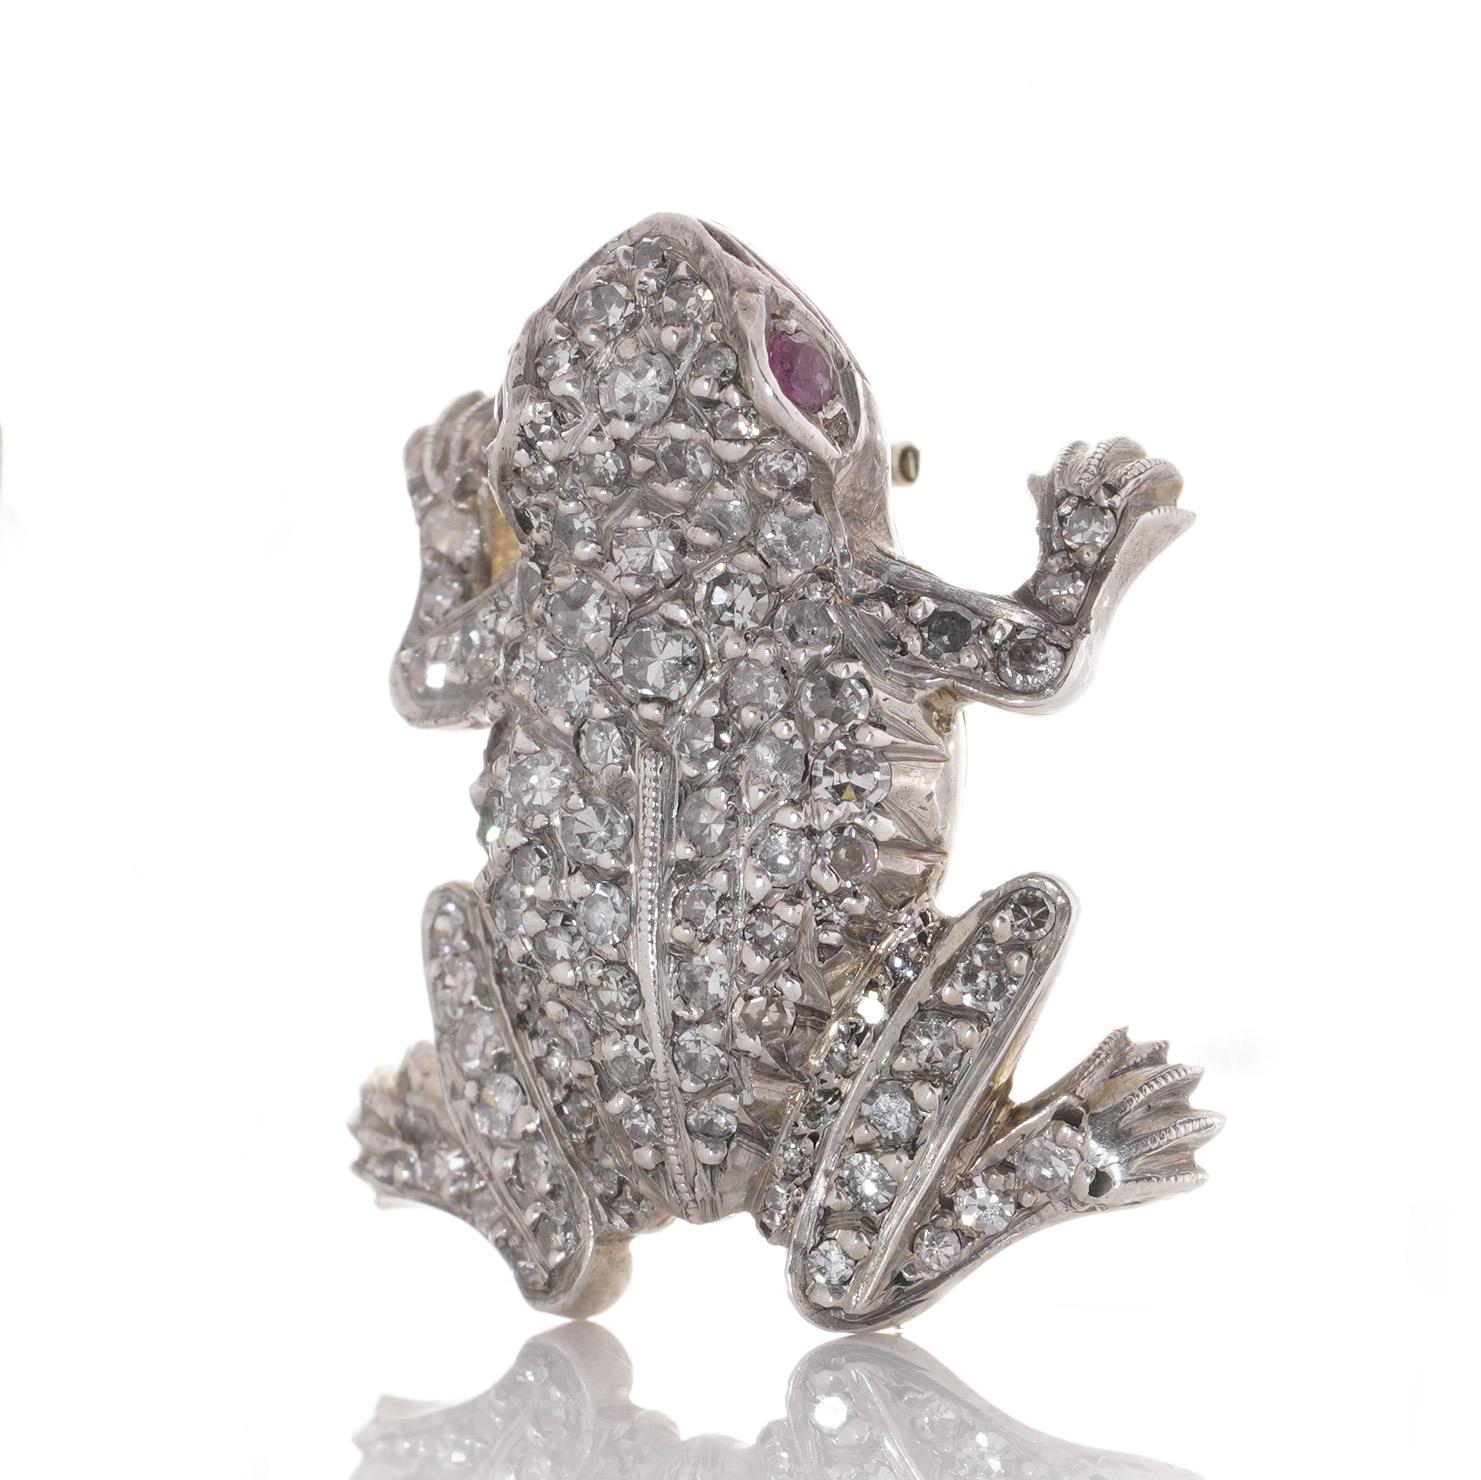 An enchanting lapel brooch from the Edwardian era, crafted in 15kt yellow gold and silver and set with diamonds and rubies takes the form of a charming frog.

The brooch showcases intricate detailing and skilled craftsmanship. The frog's body is